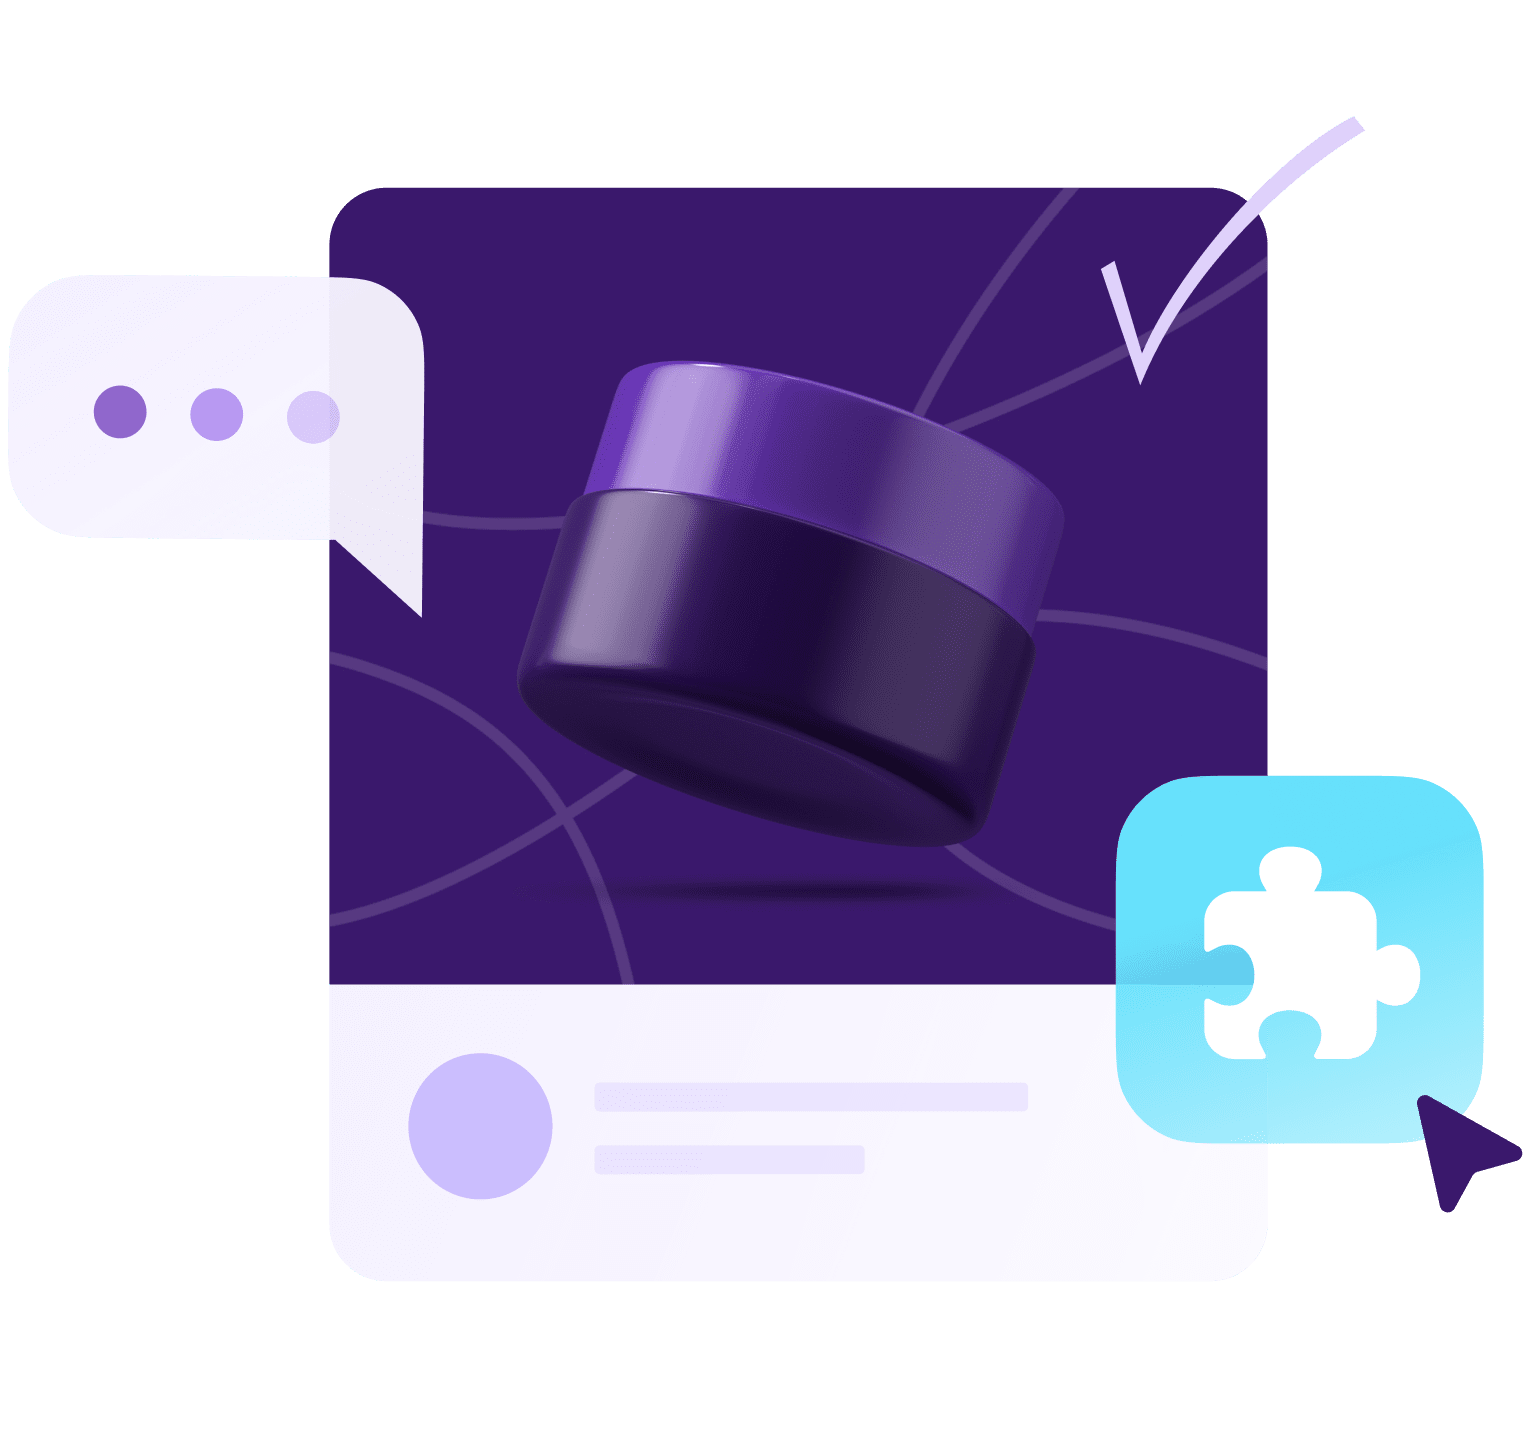 Illustration with cosmetic jar, chat interface, and a plugin icon